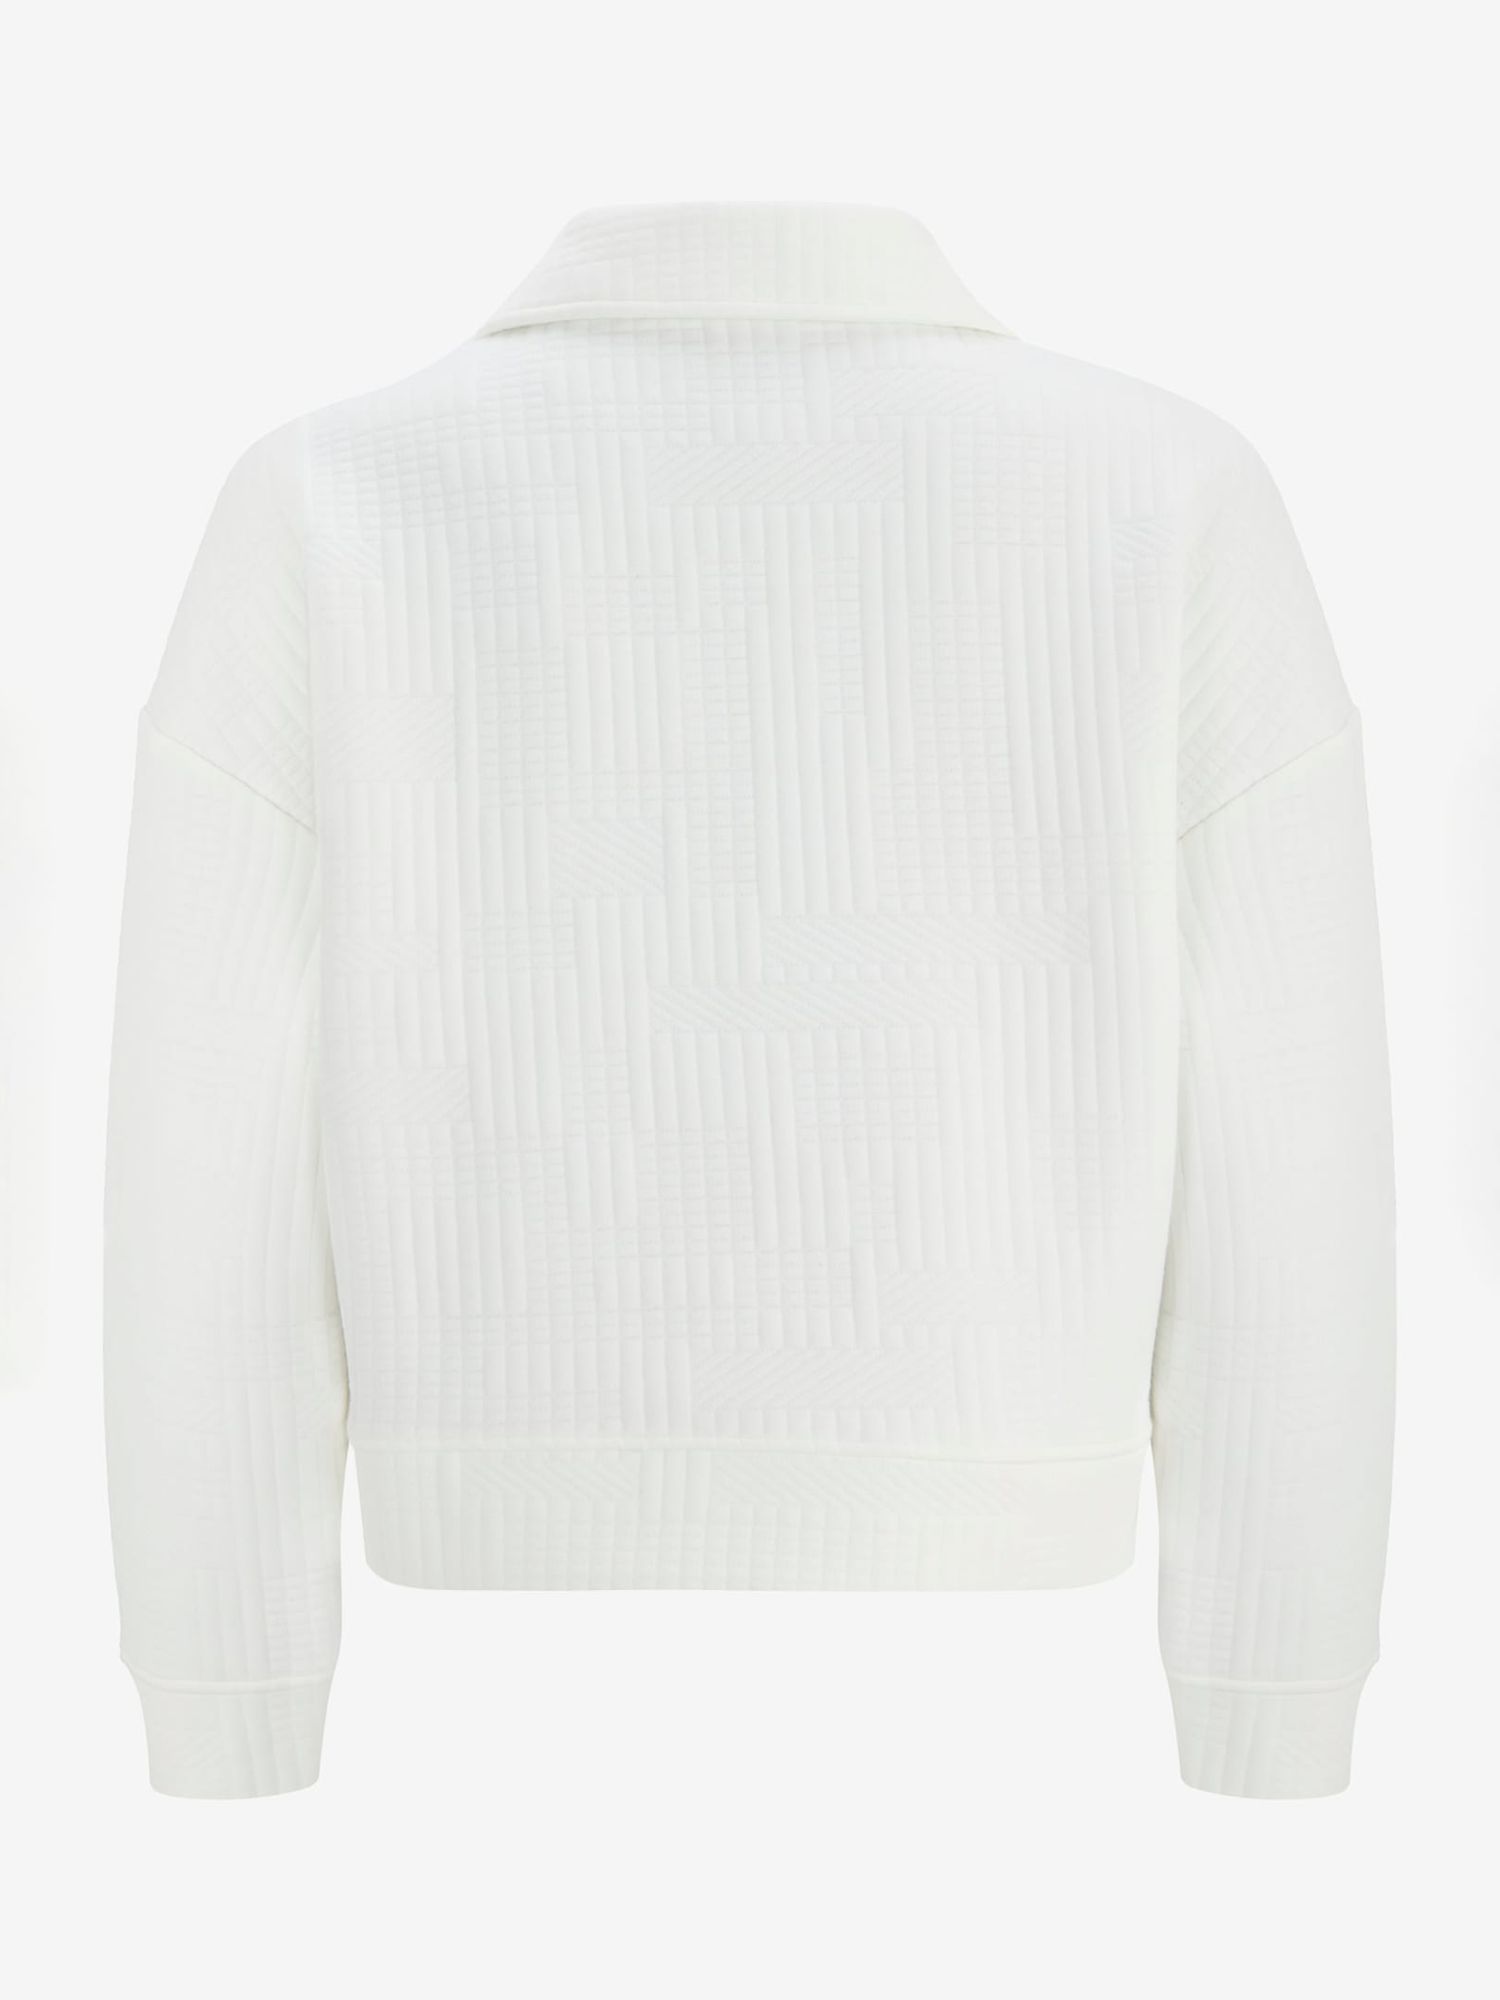 Mint Velvet Quilted Jersey Sweatshirt, White Ivory at John Lewis & Partners